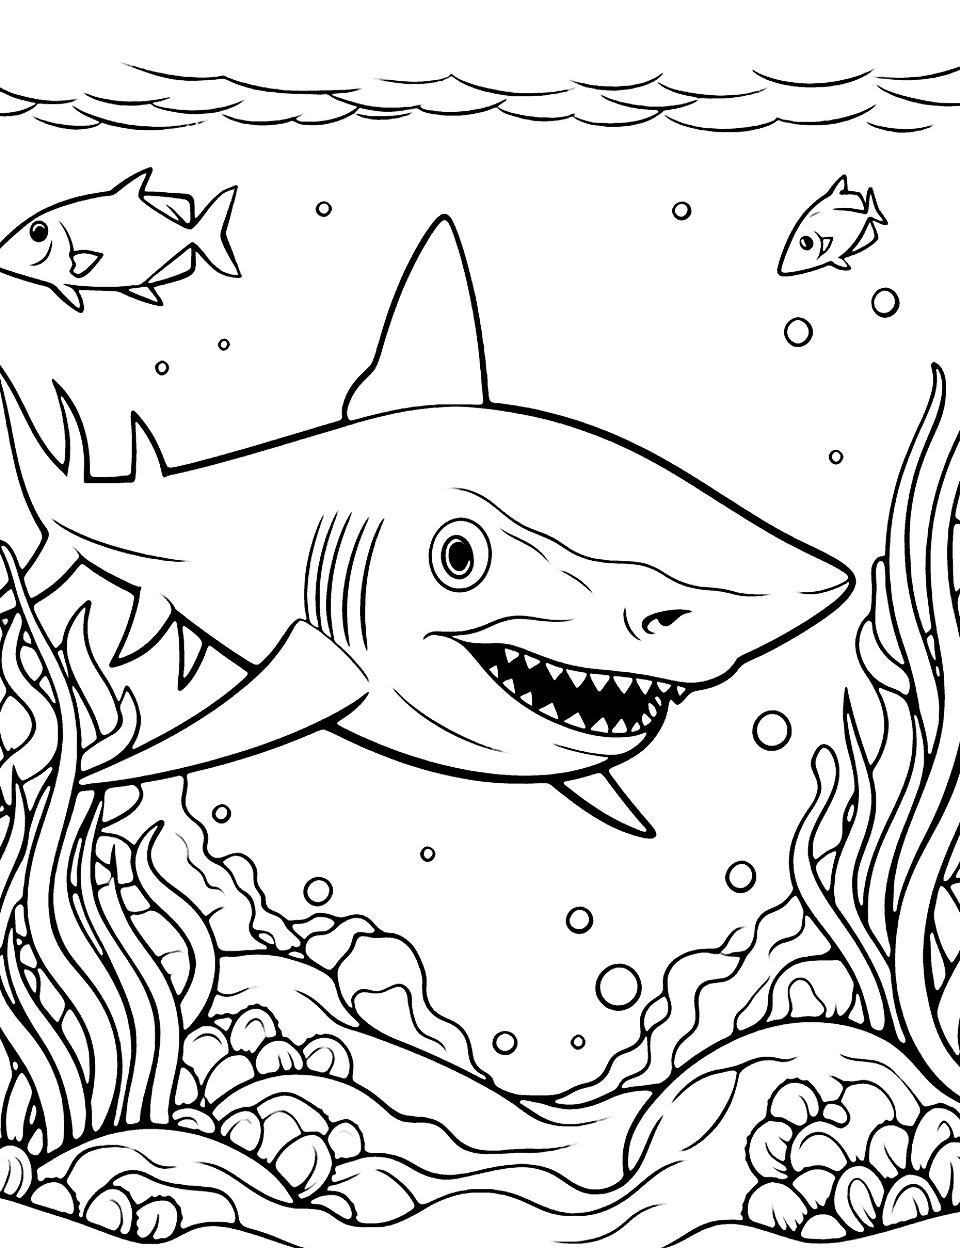 Reef Shark and Sea Coloring Page - A reef shark cruising along the ocean bottom.